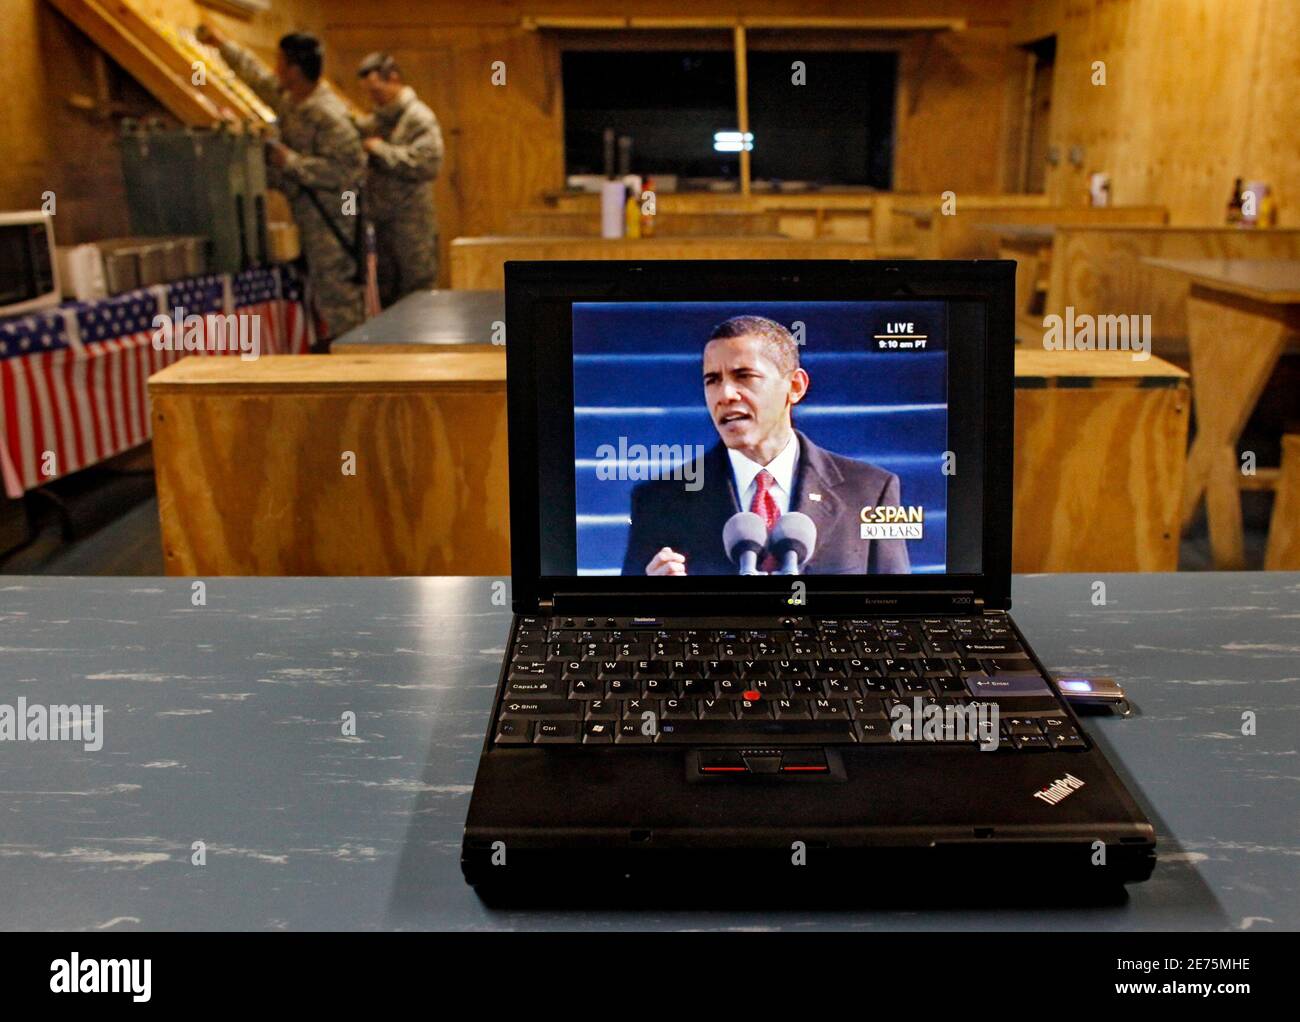 U.S. soldiers get food from the mess hall at Combat Outpost Keating in eastern Afghanistan as a webcast of President Barack Obama's  inaugural address is shown via webcast January 20, 2009.  REUTERS/Bob Strong  (AFGHANISTAN) Stock Photo